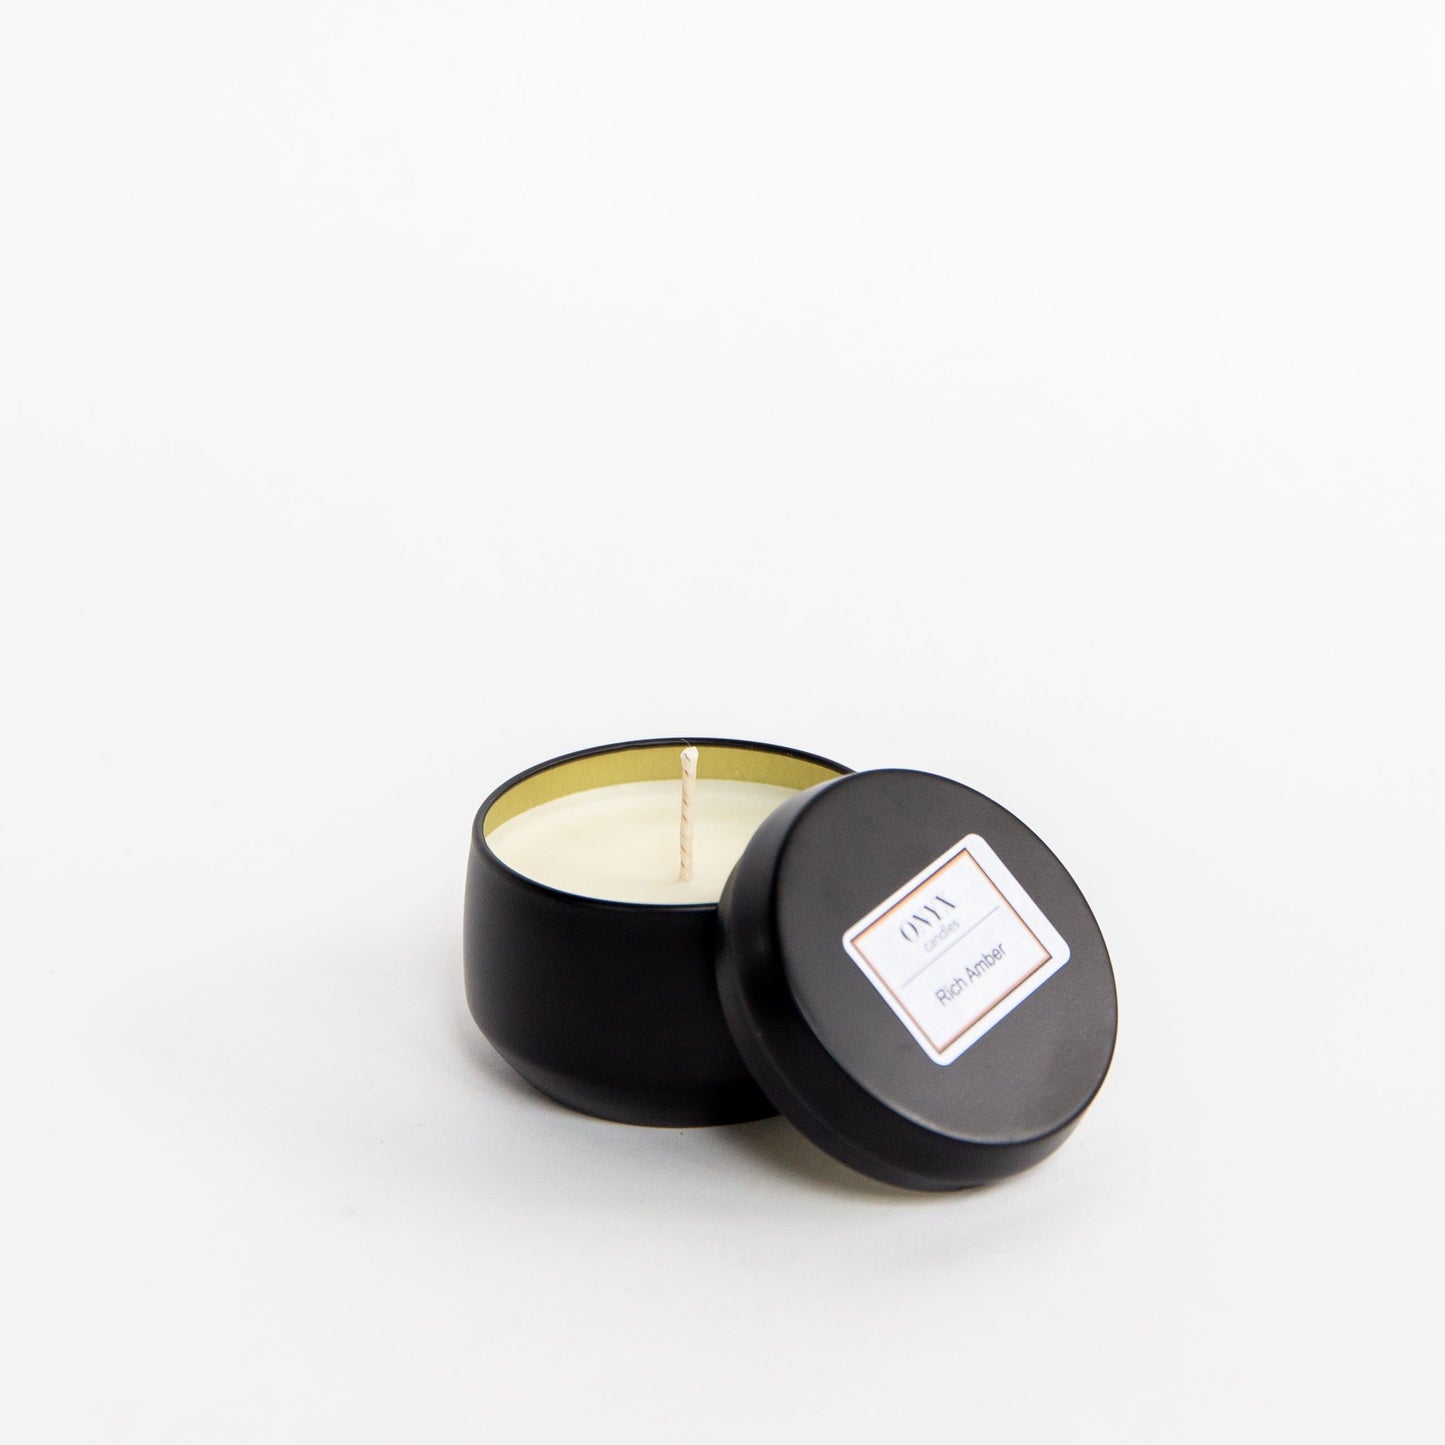 Rich Amber scented candle in a 4 oz matte black tin